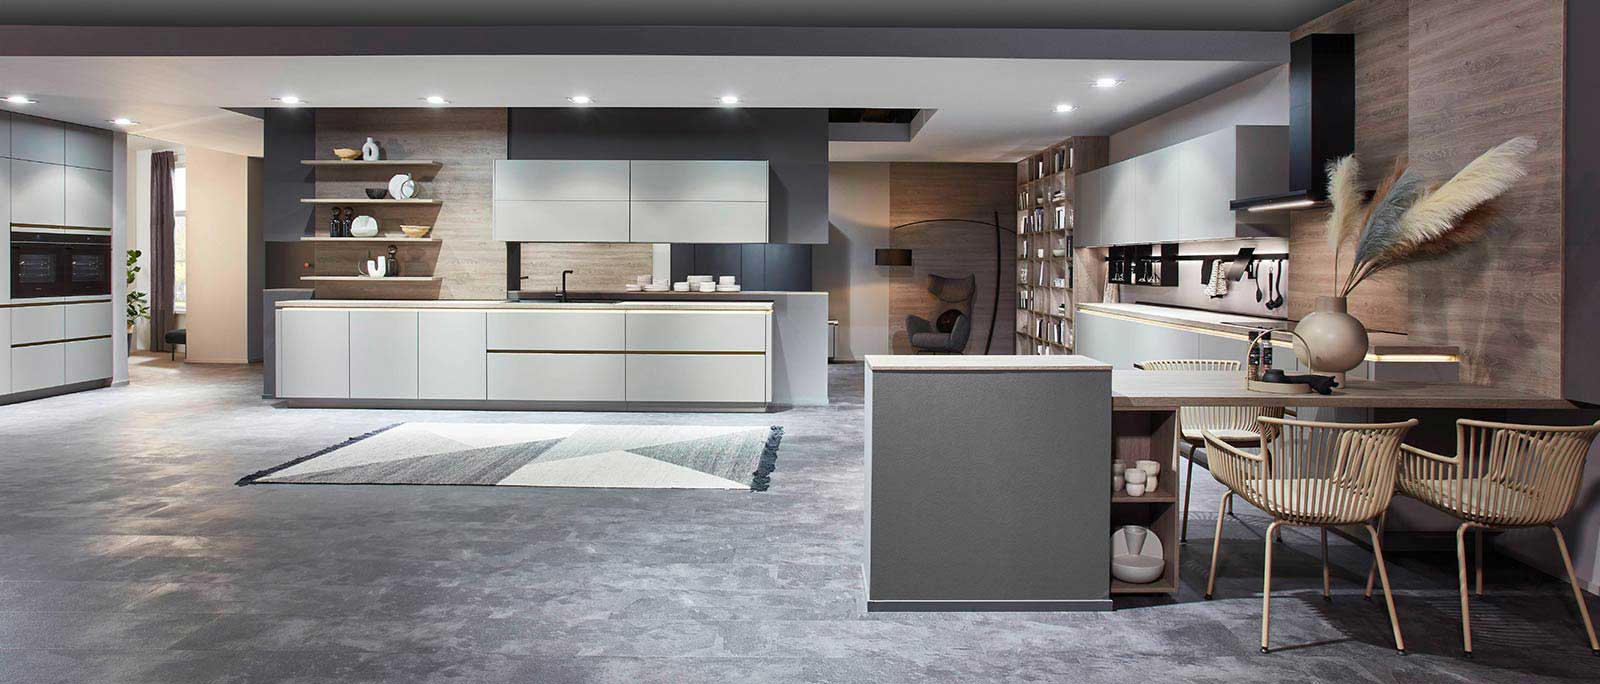 A Modular Kitchen That Works for Your Lifestyle